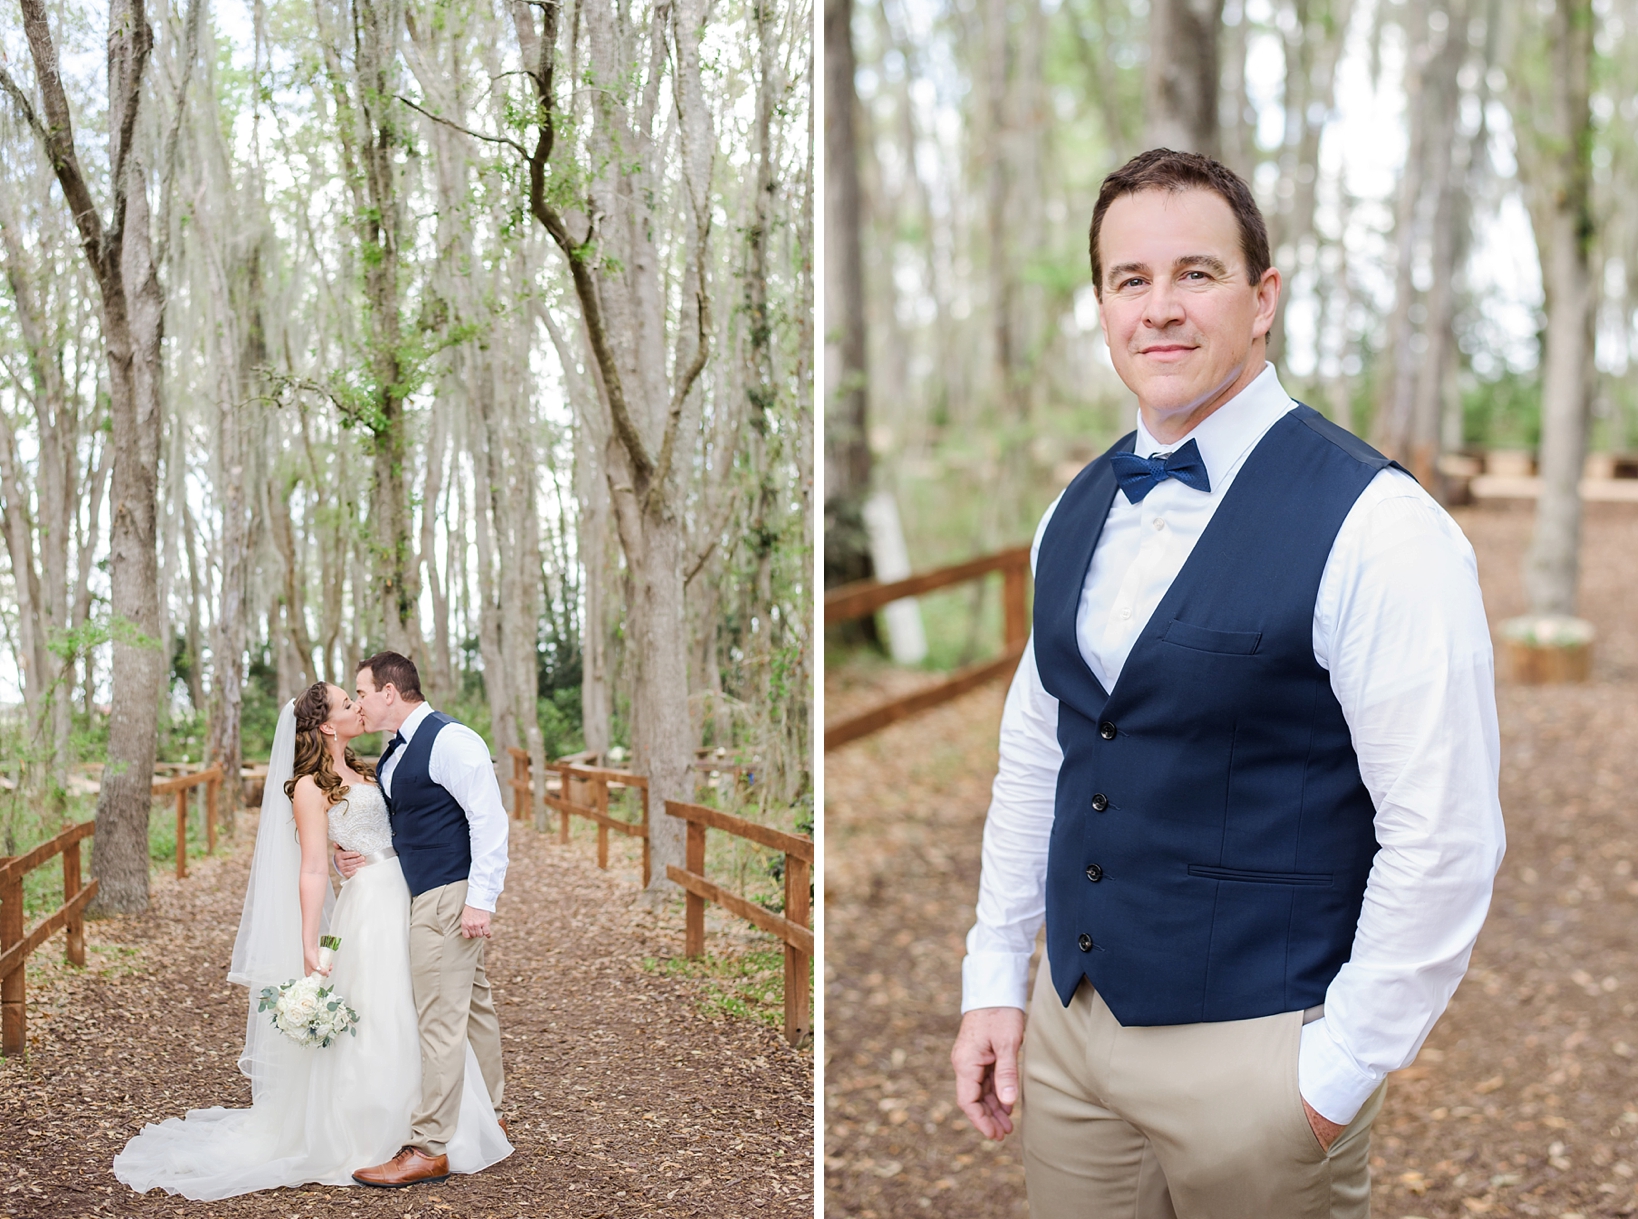 Bride and groom kissing under the forest canopy and a classic pose by the groom